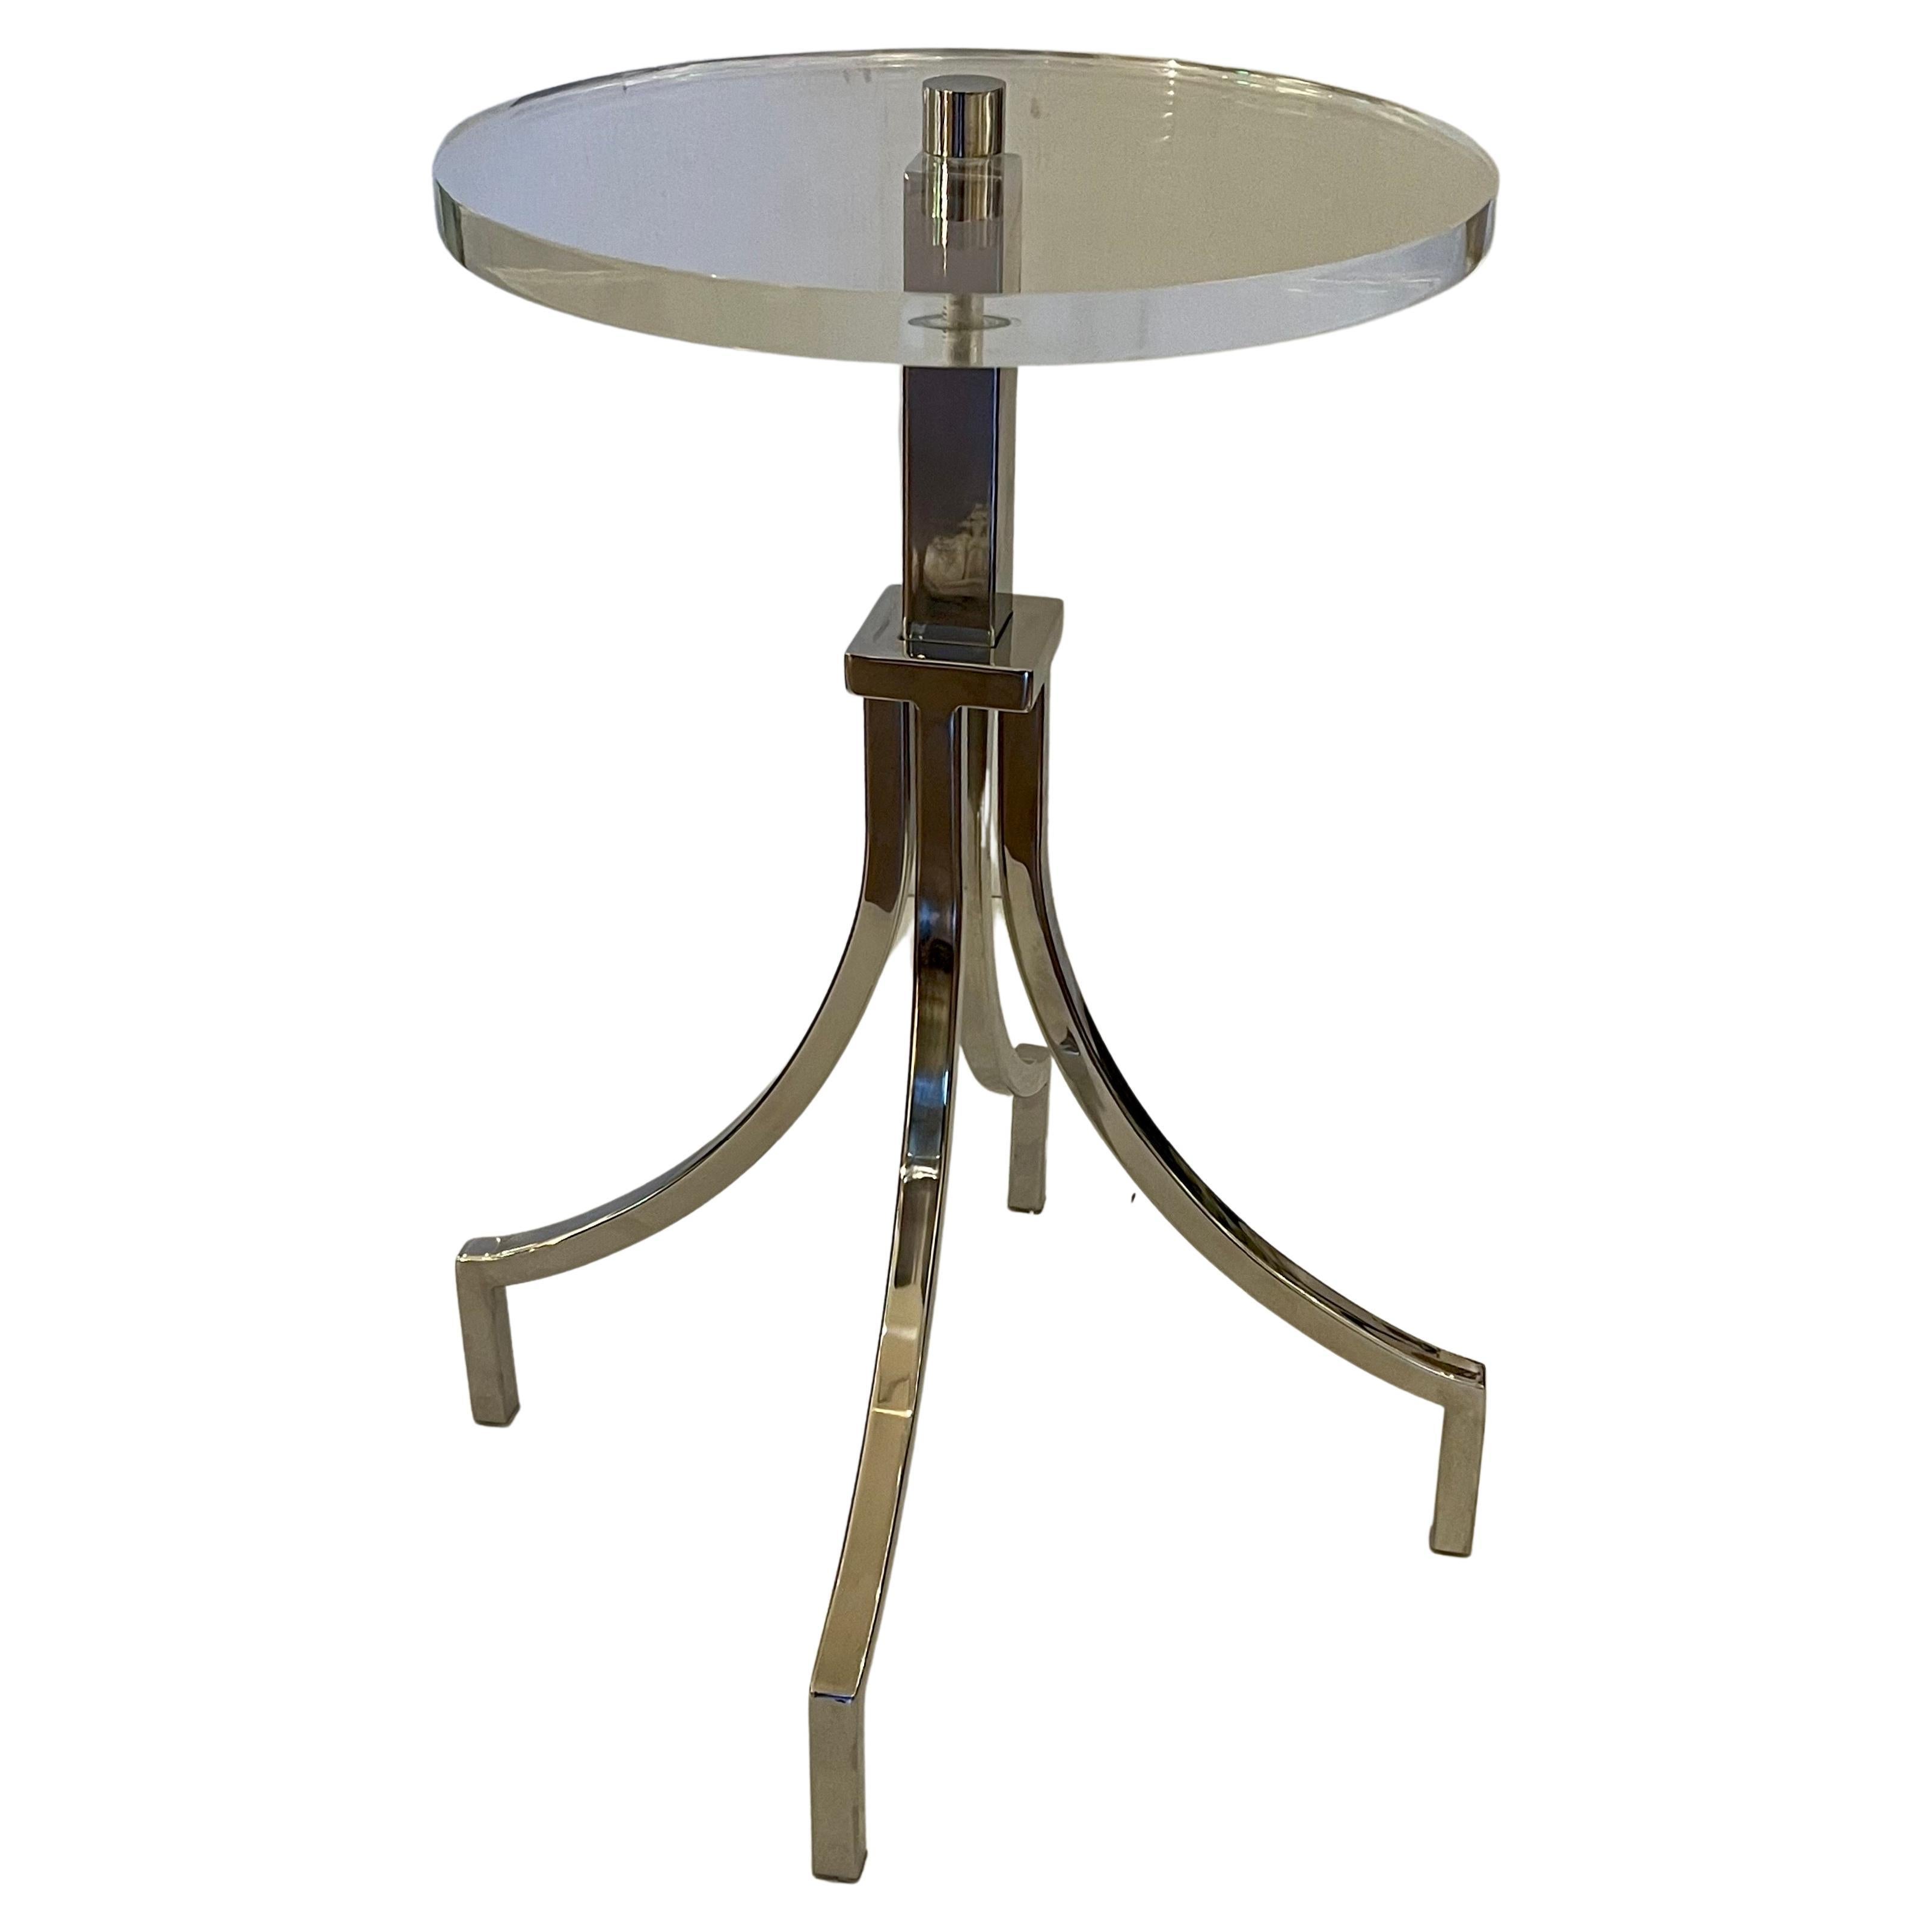 Striking Elegant Solid Thick Lucite Top & Nickel Plated Base End Cocktail table In Excellent Condition For Sale In San Diego, CA